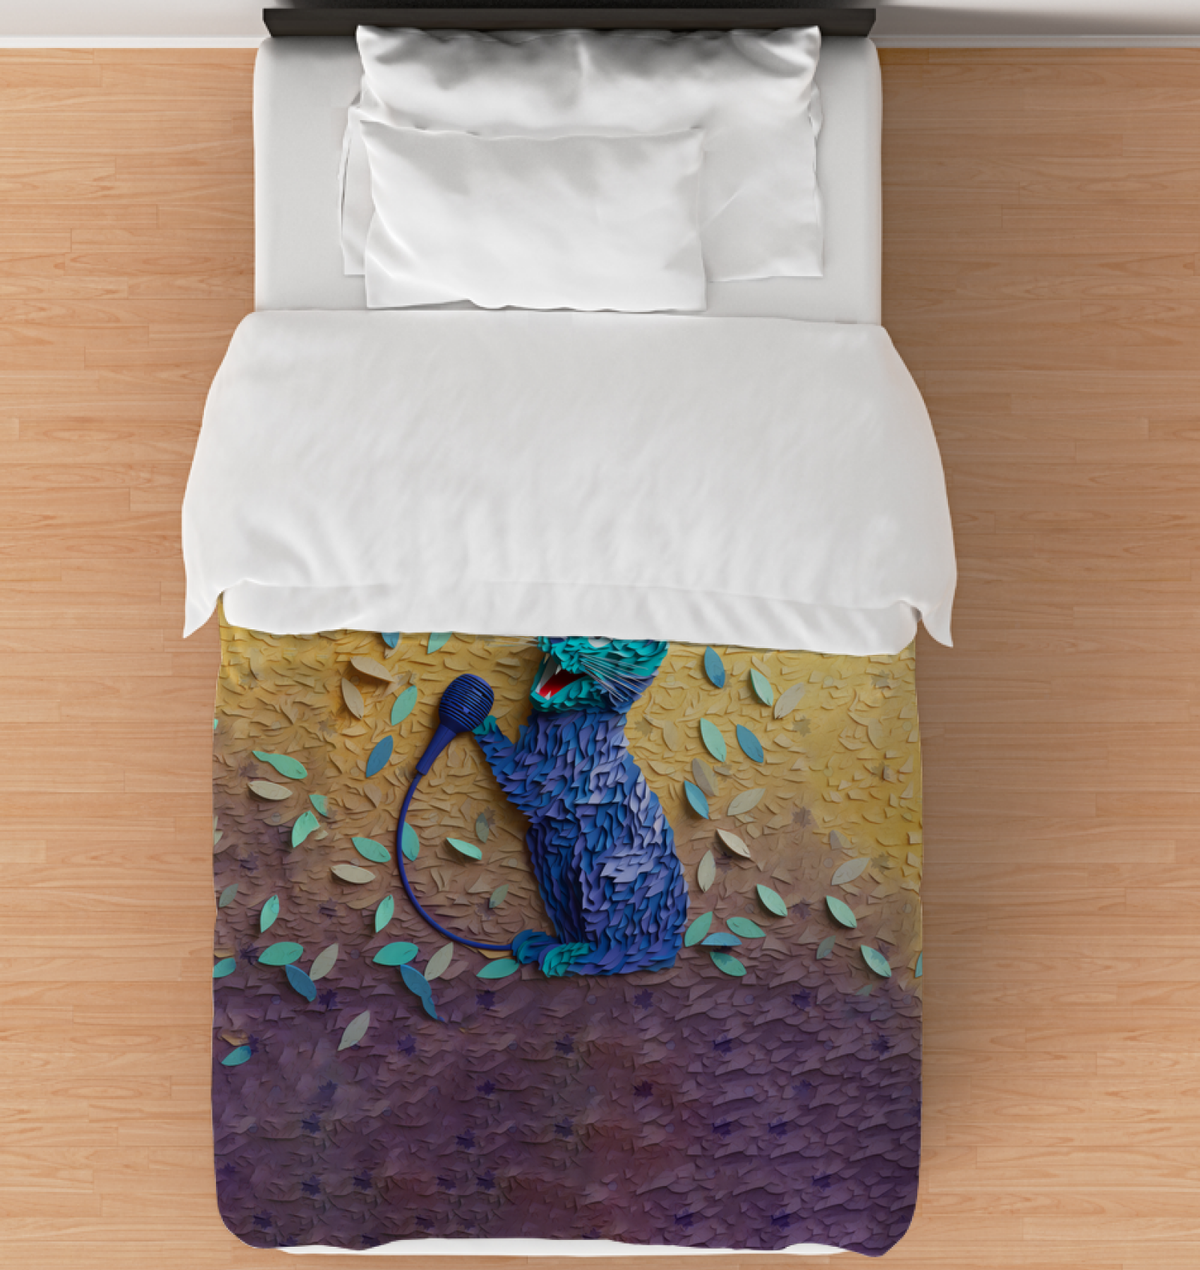 Duvet cover with delicate origami butterfly design.